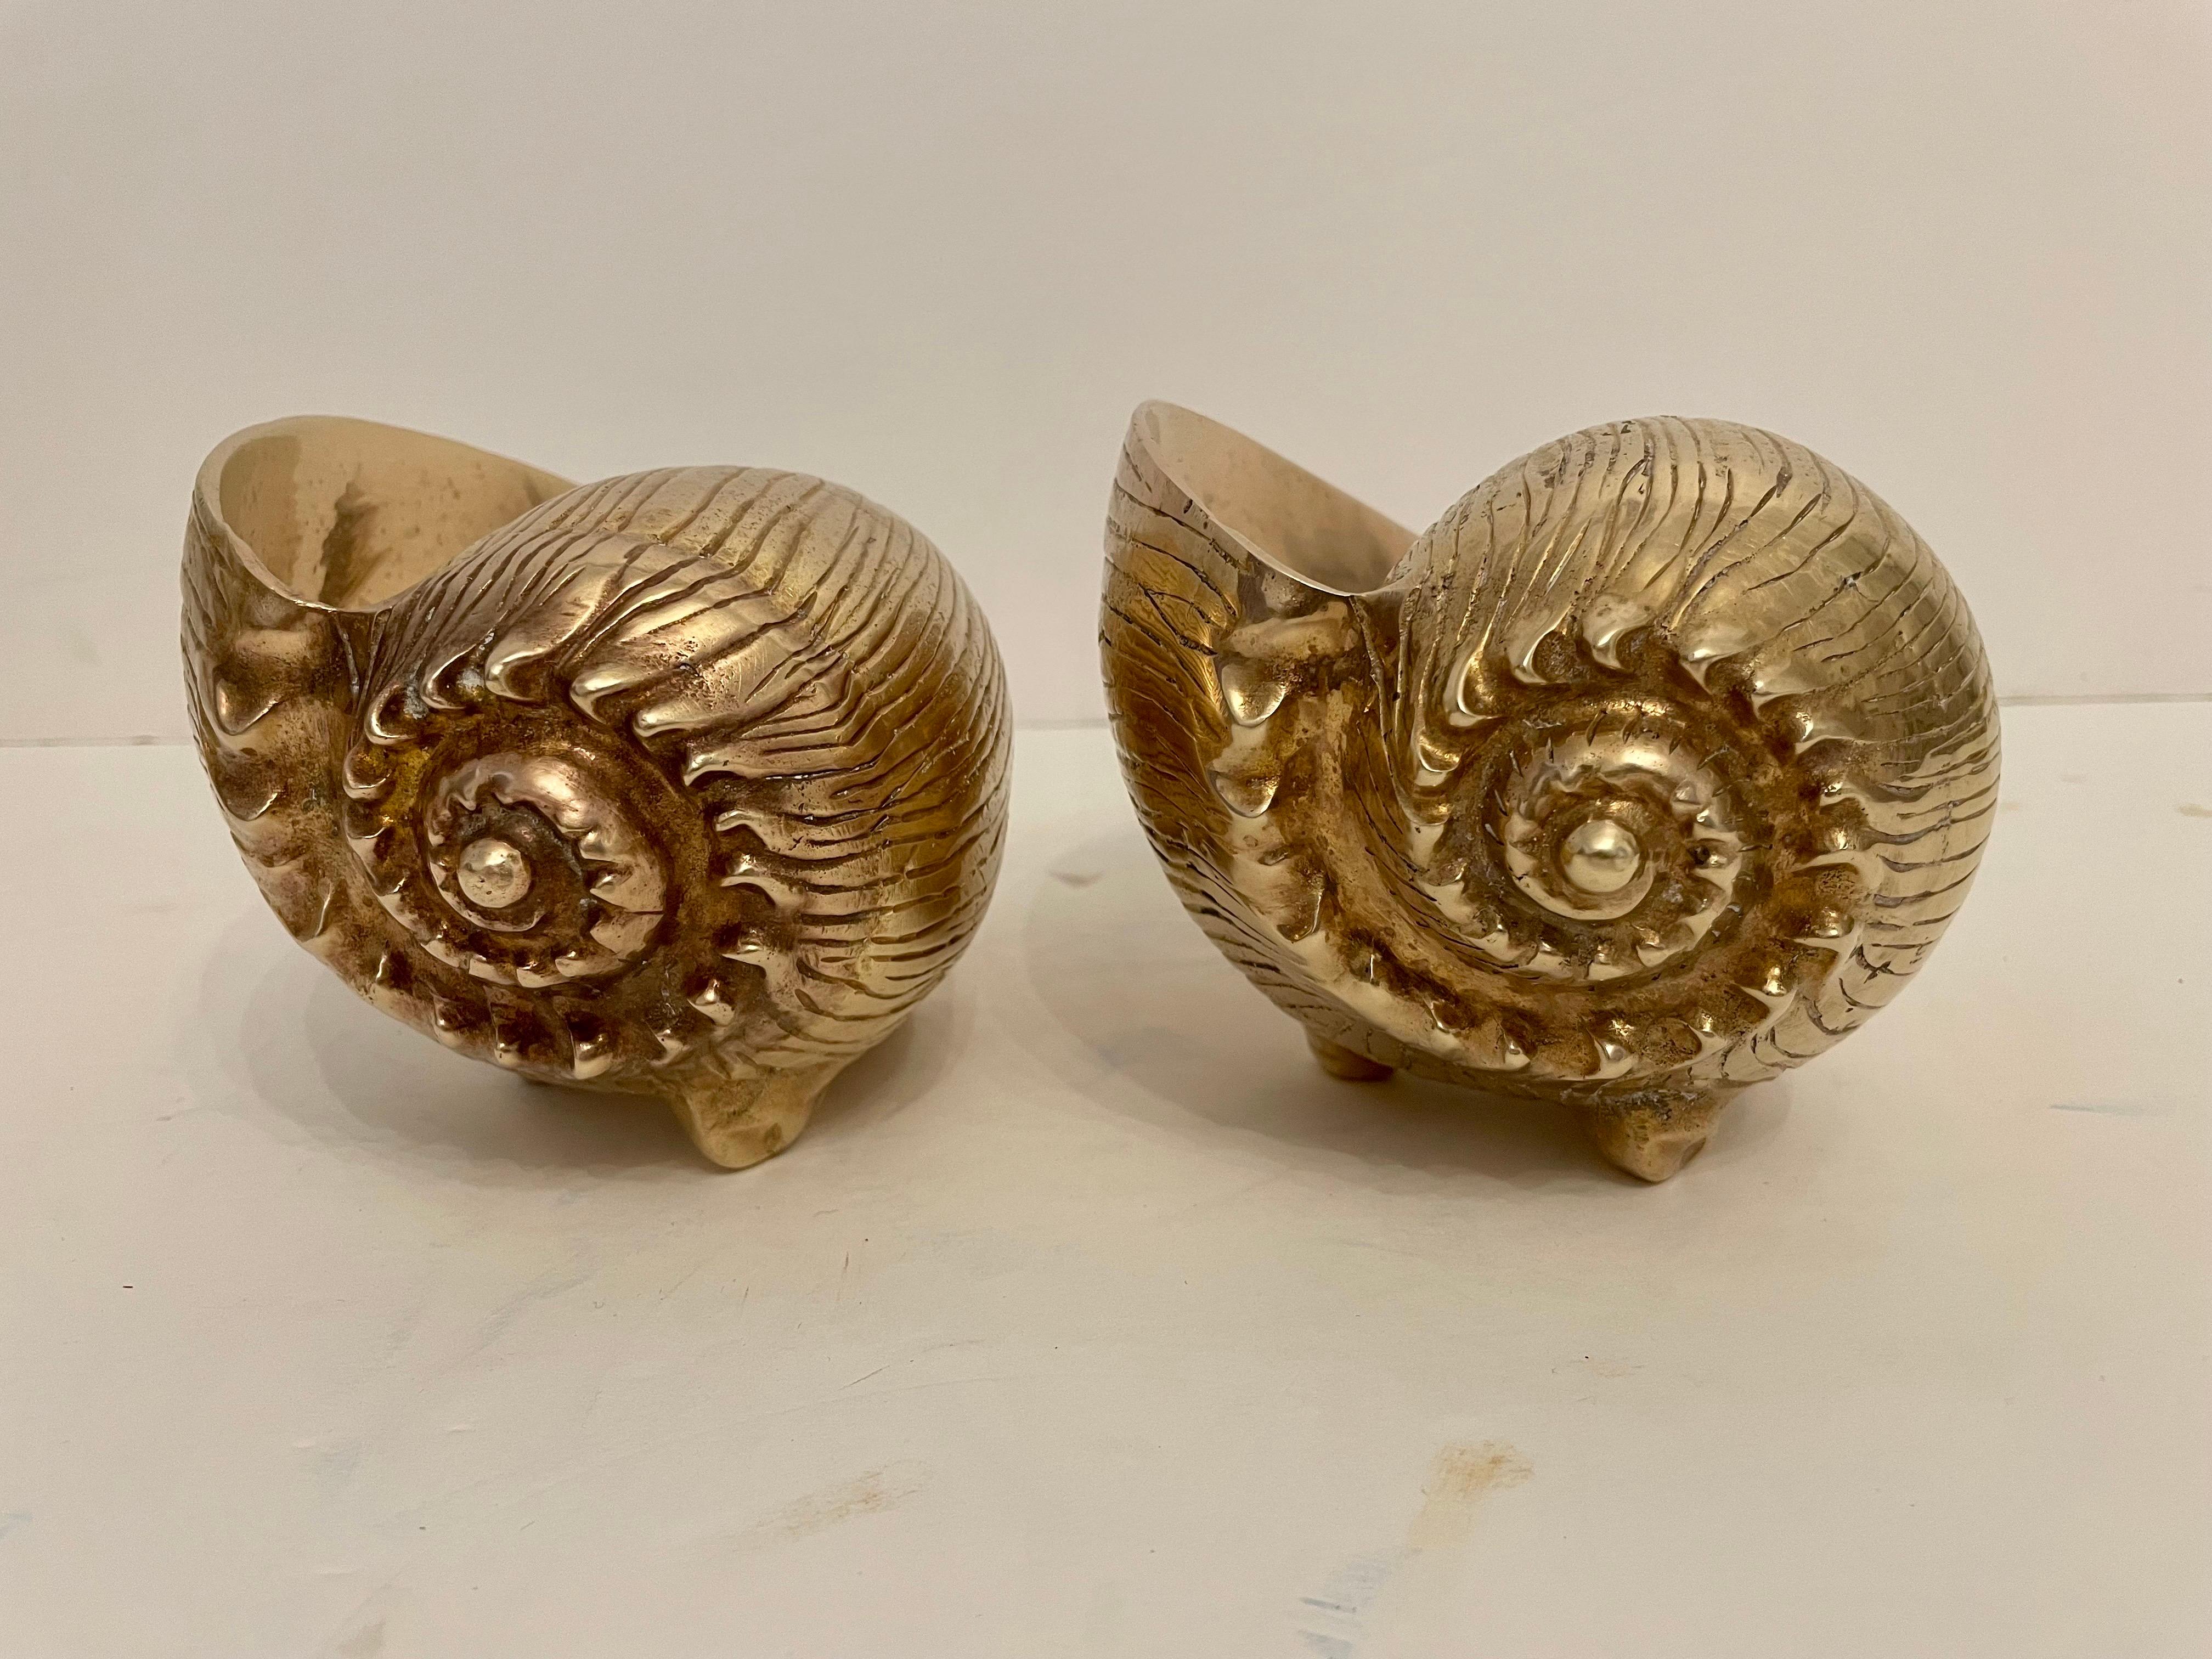 Pair of Brass Hollywood Regency vintage sea shell planters, Nicely detailed. Good condition with some patina from age and use. Measures 7